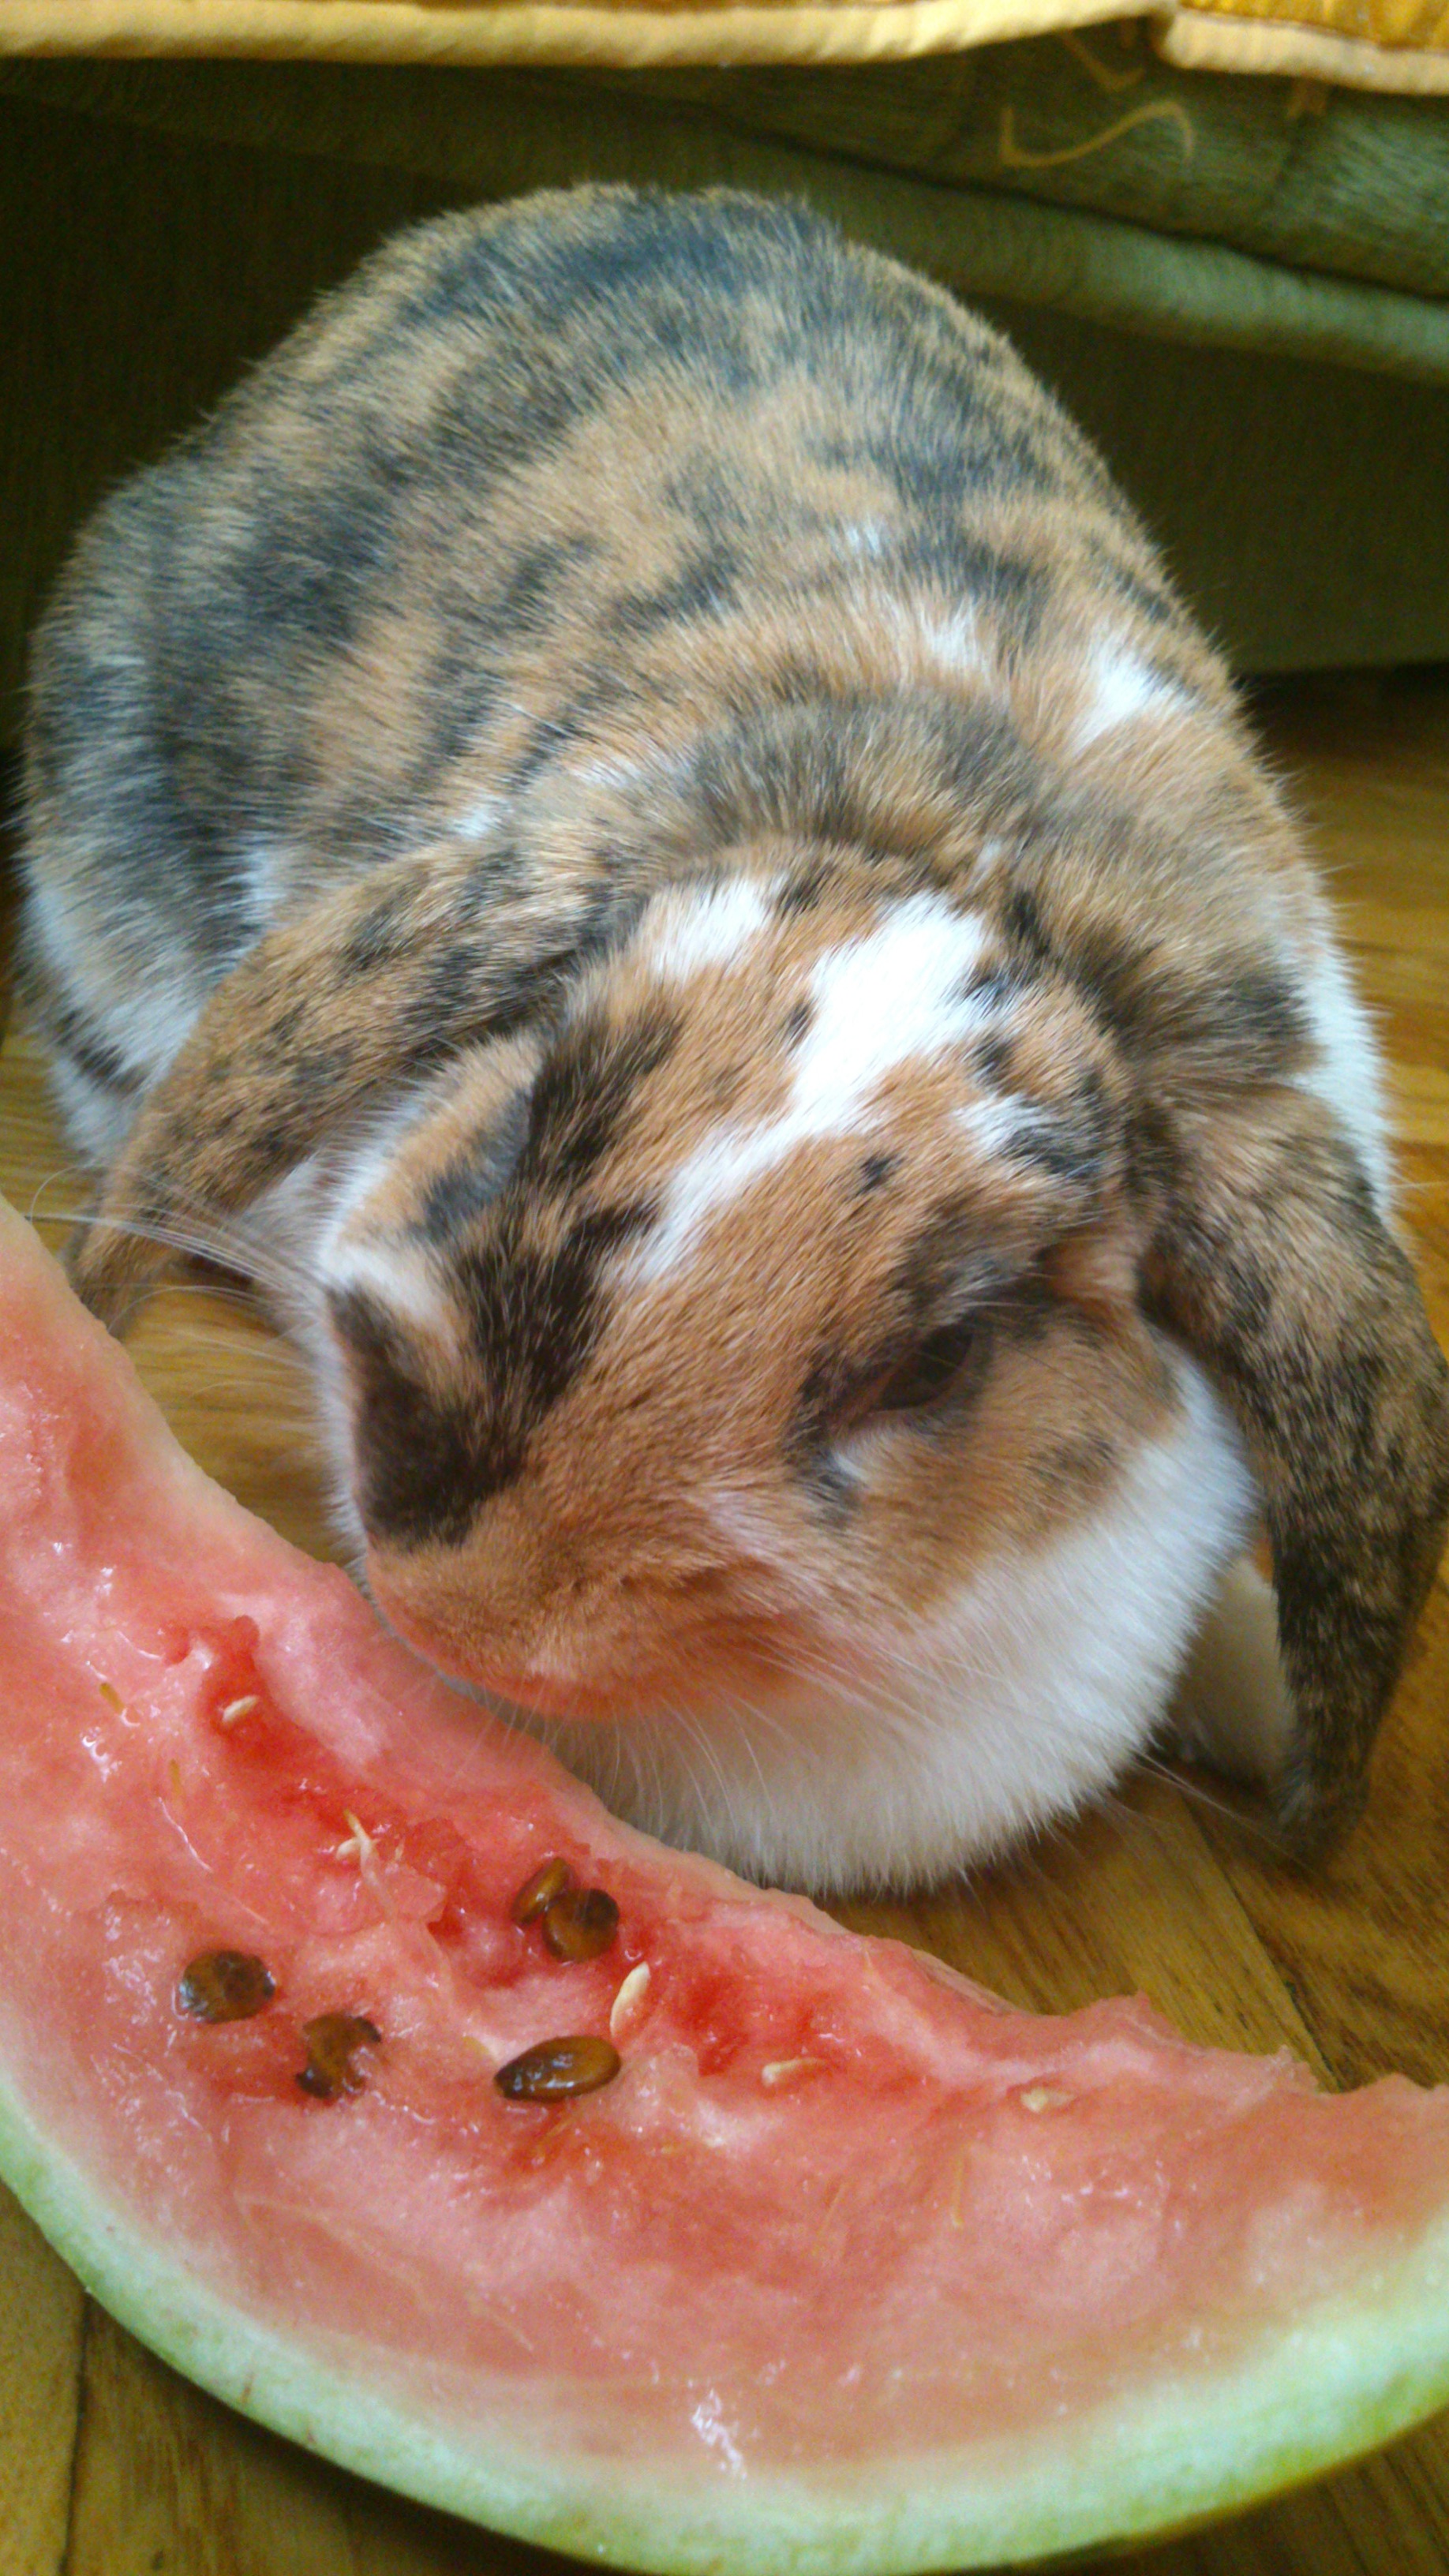 Bunny Discovers a Love for Watermelon